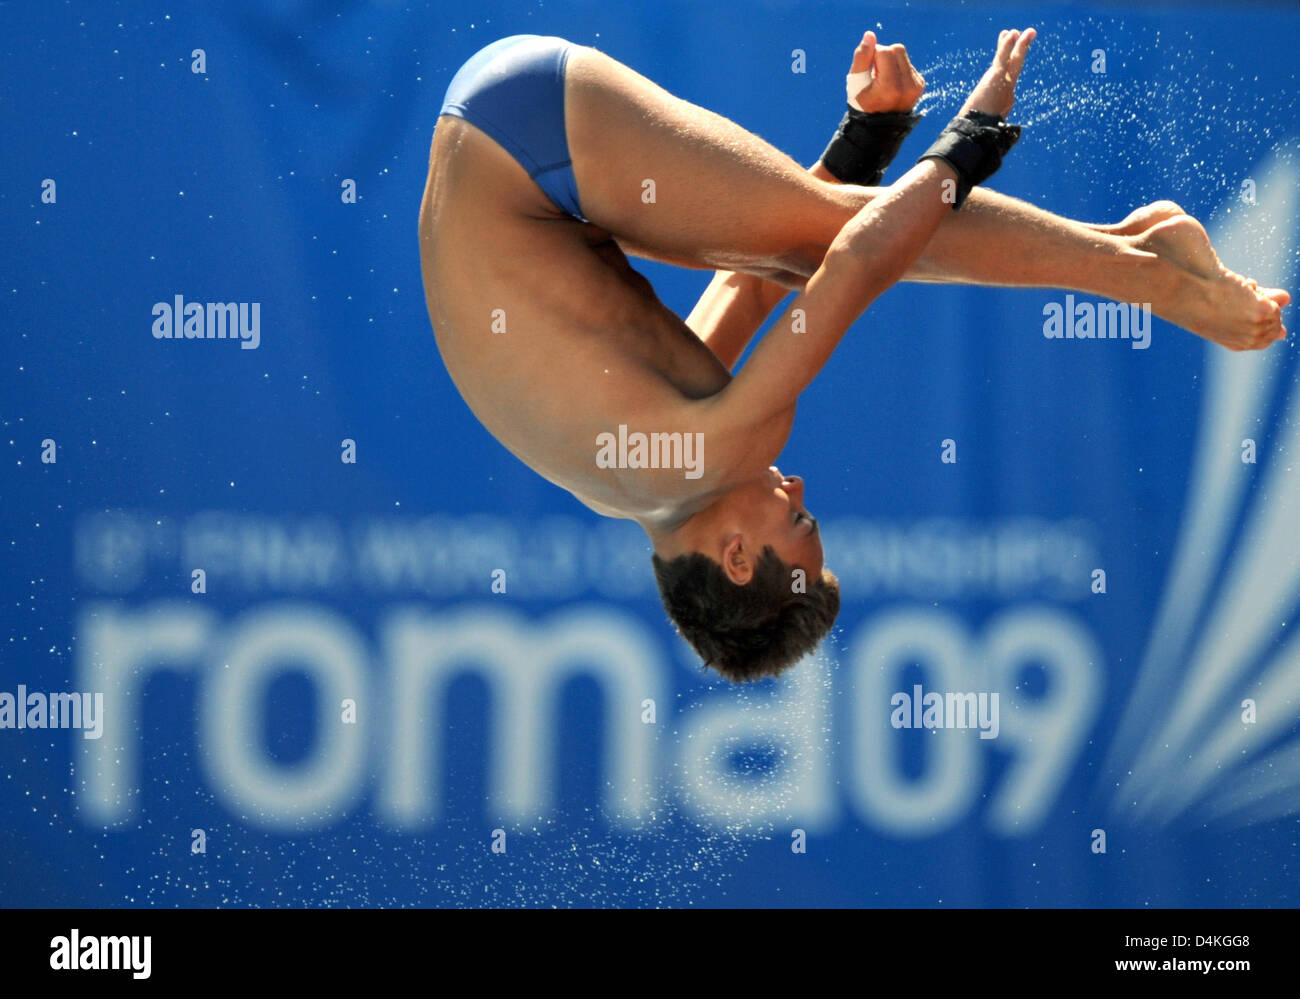 Great Britain?s Thomas Daley dives off the 10m board at the FINA World Championships in Rome, Italy, 21 July 2009. Photo: MARCUS BRANDT Stock Photo